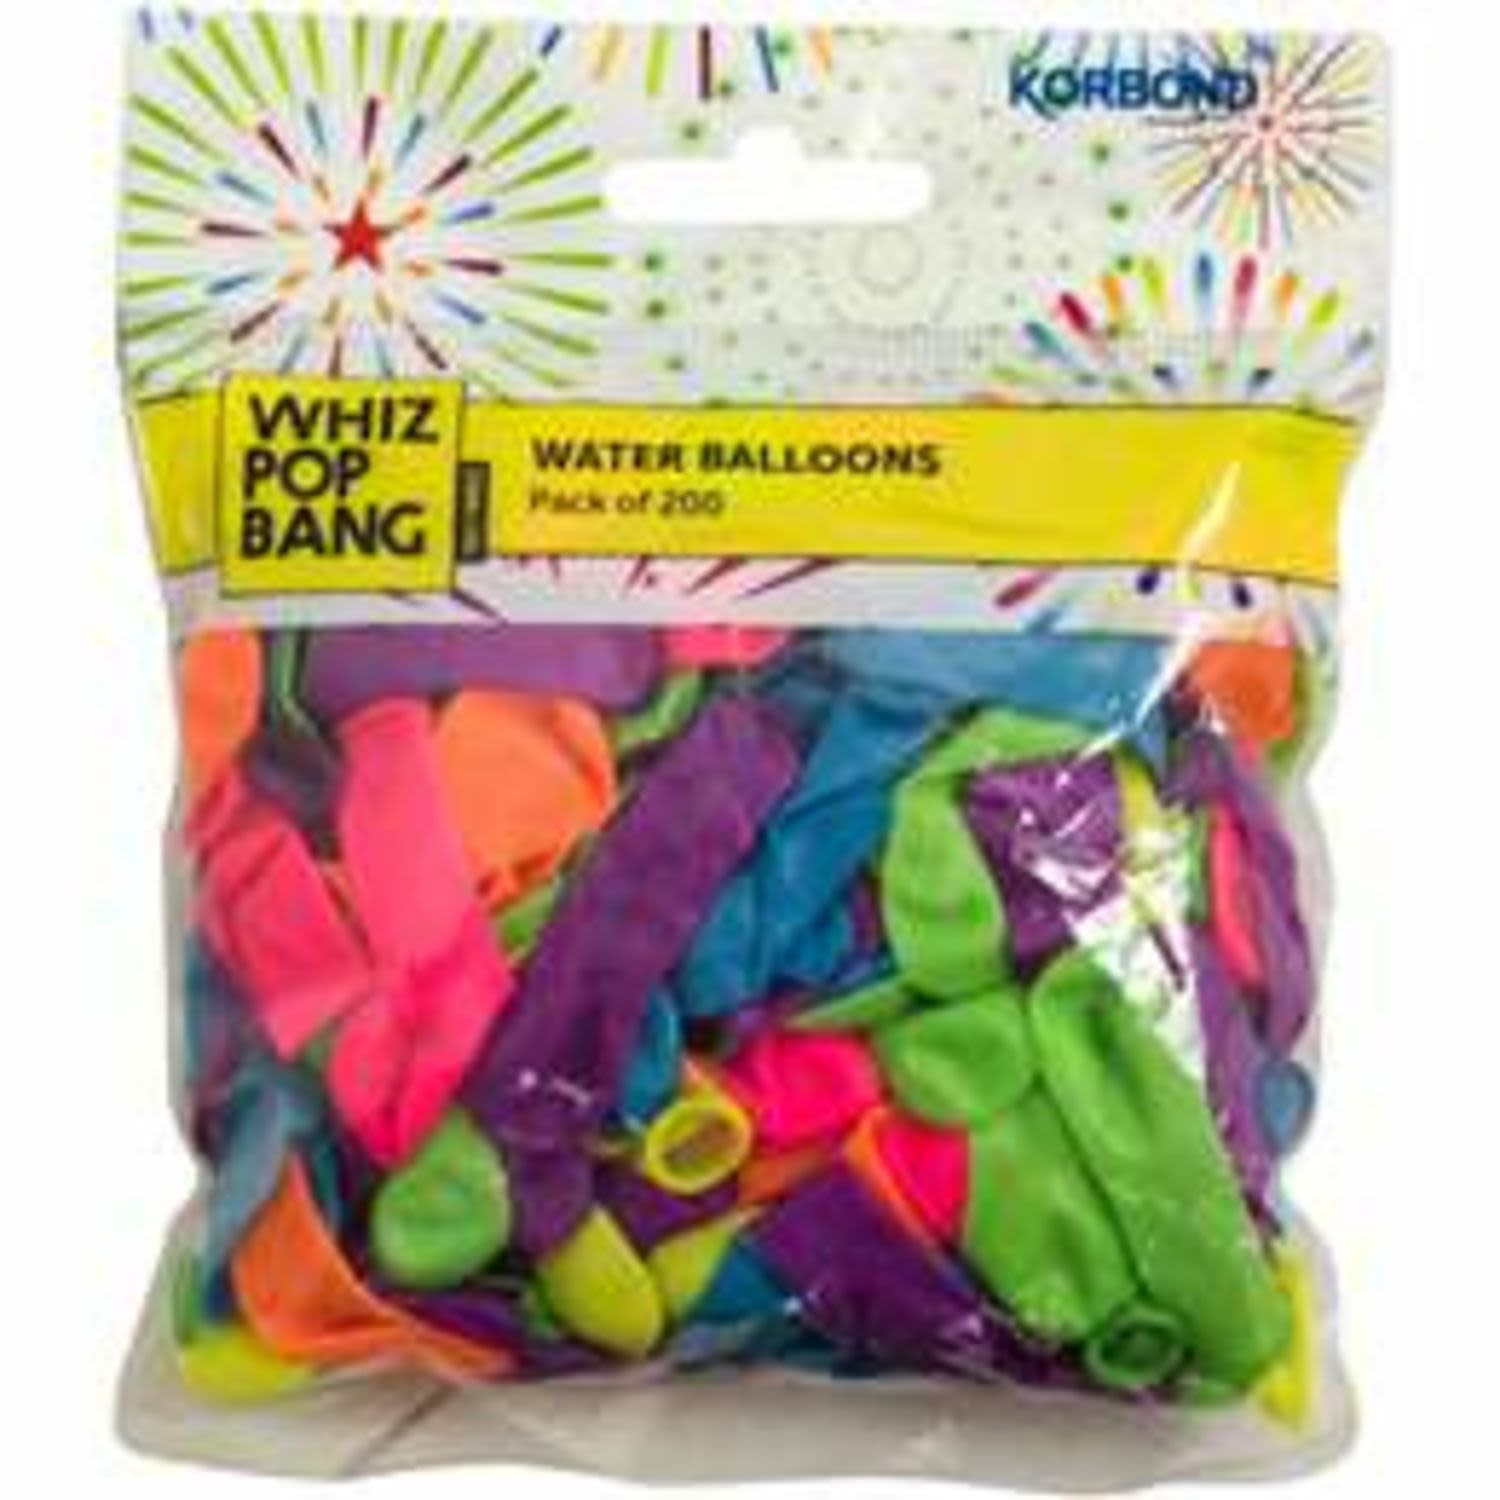 Korbond Party Balloons Water Bombs, 200 Each